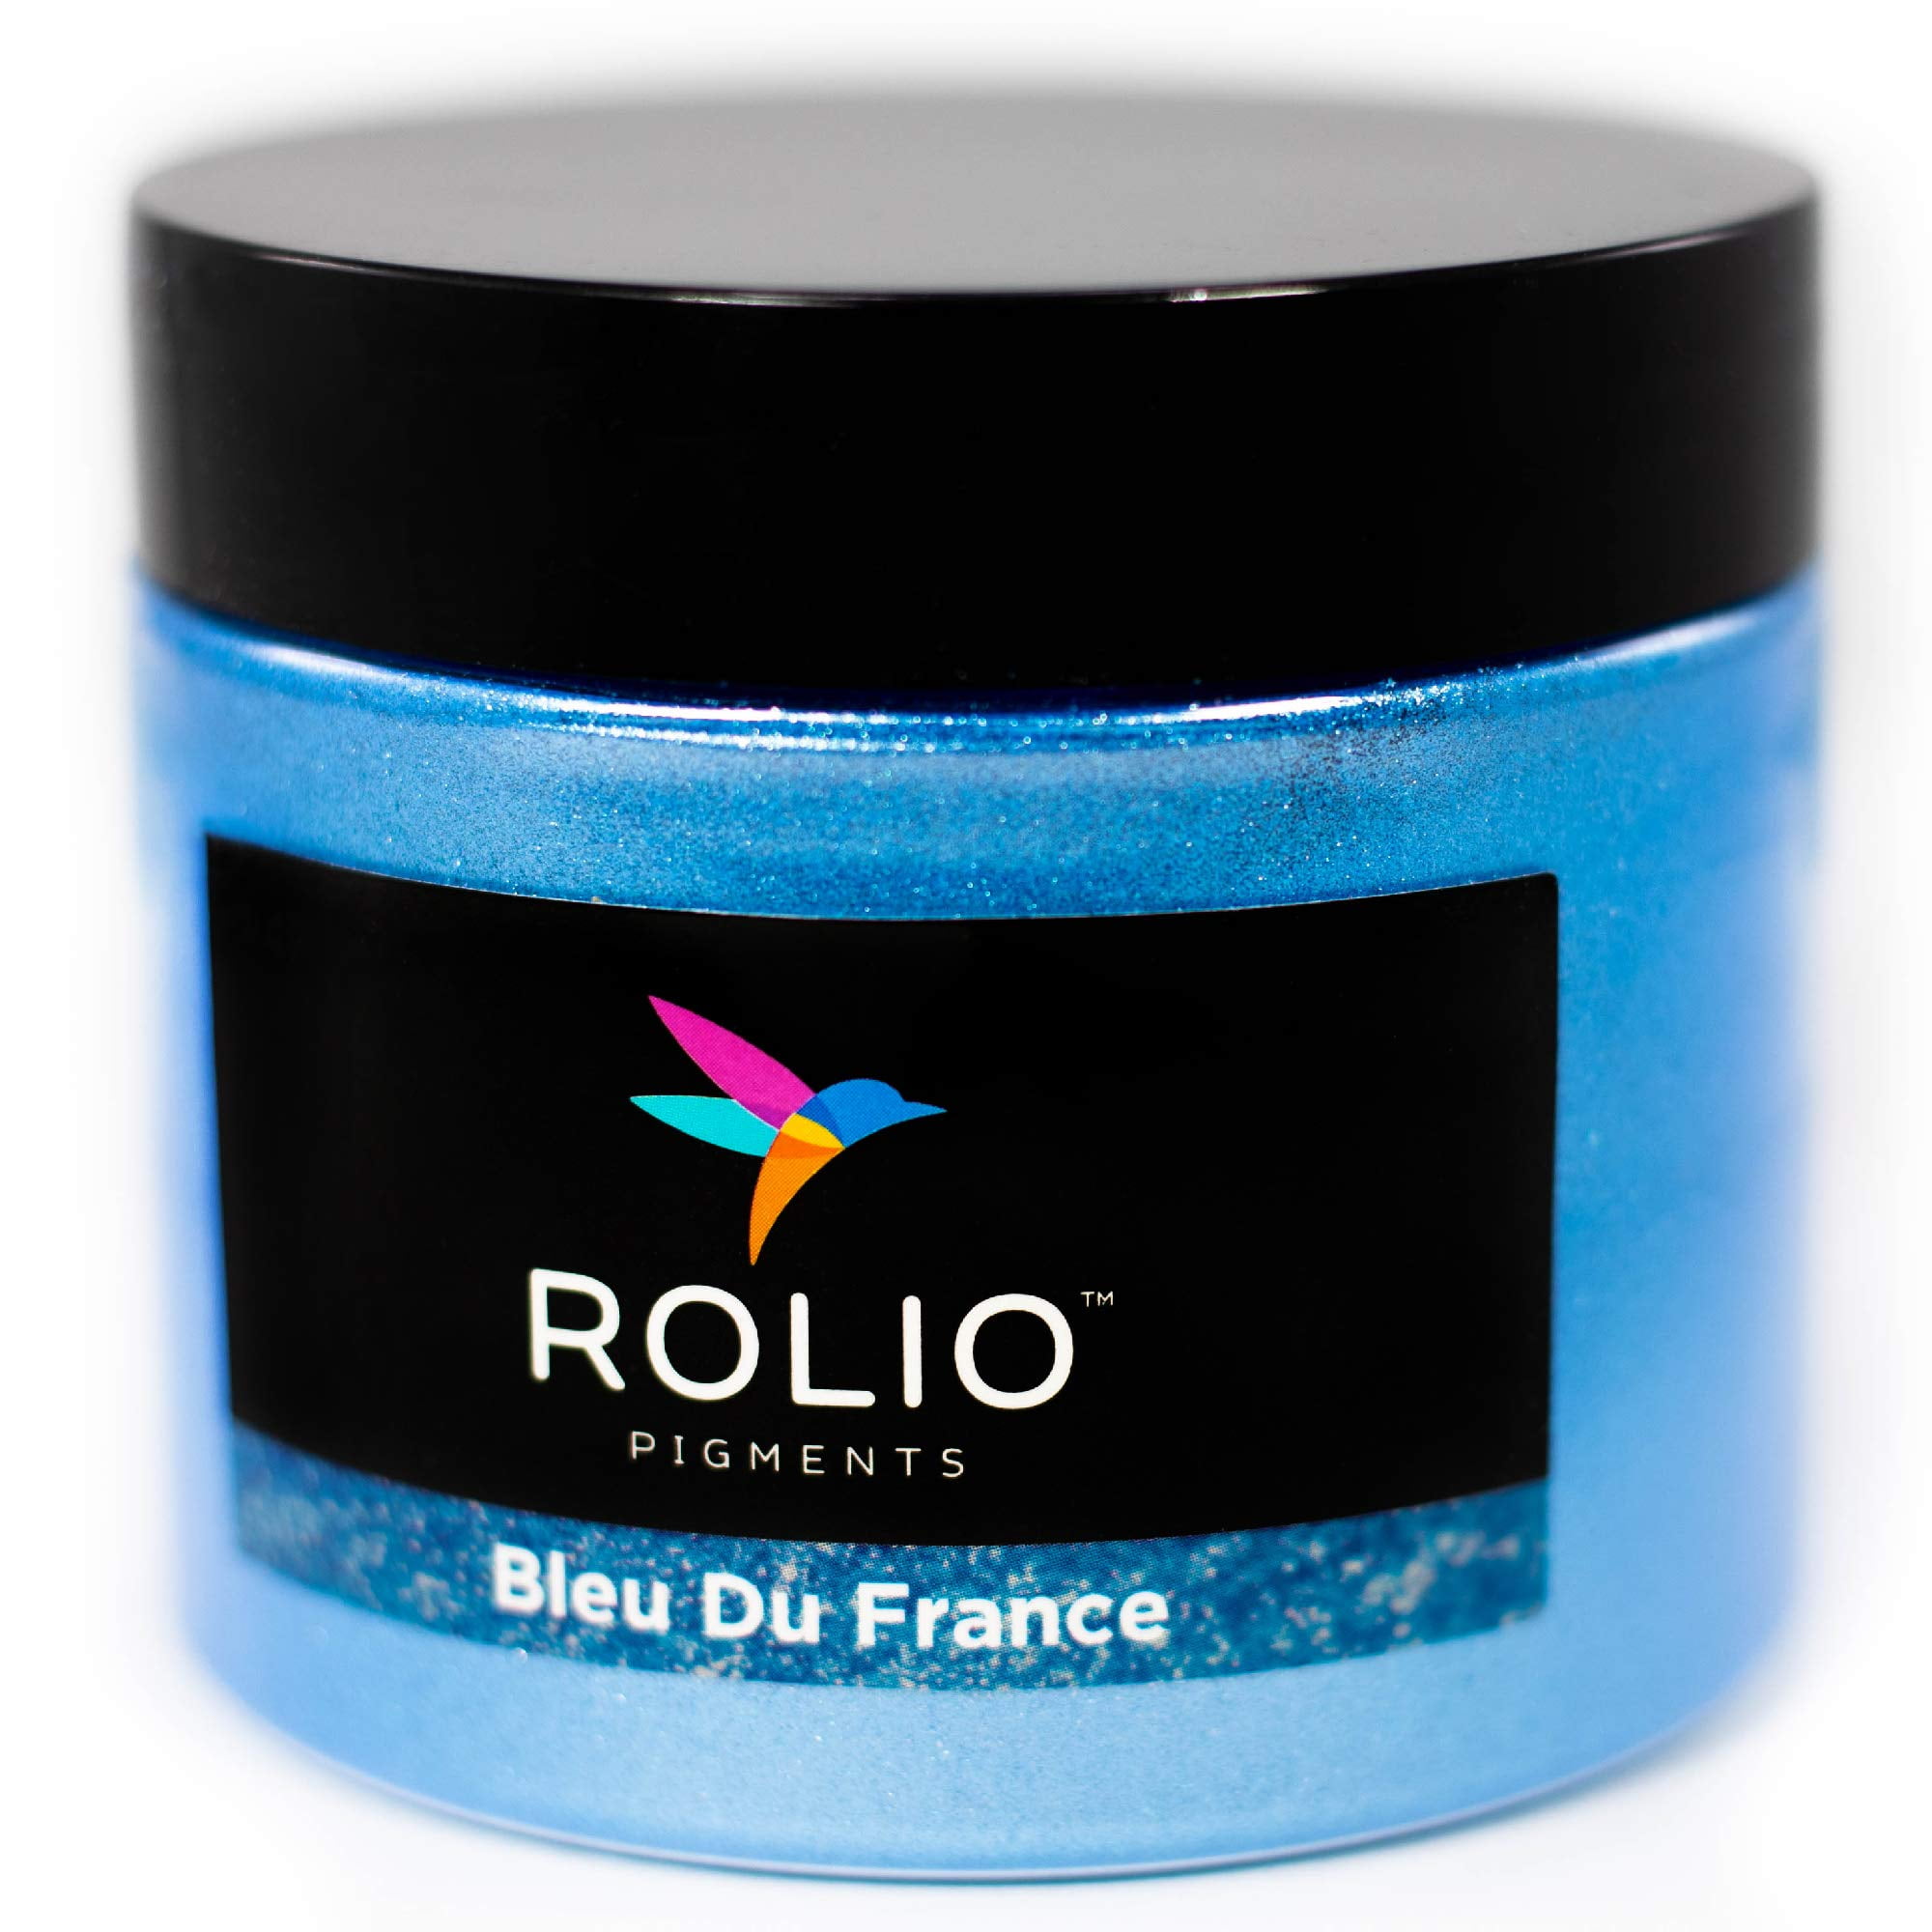 Rolio - Mica Powder - 1 Jar of Pigment for Paint, Dye, Soap Making, Nail Polish, Epoxy Resin, Candle Making, Bath Bombs, Slime - 50g / 1.76oz - Blue